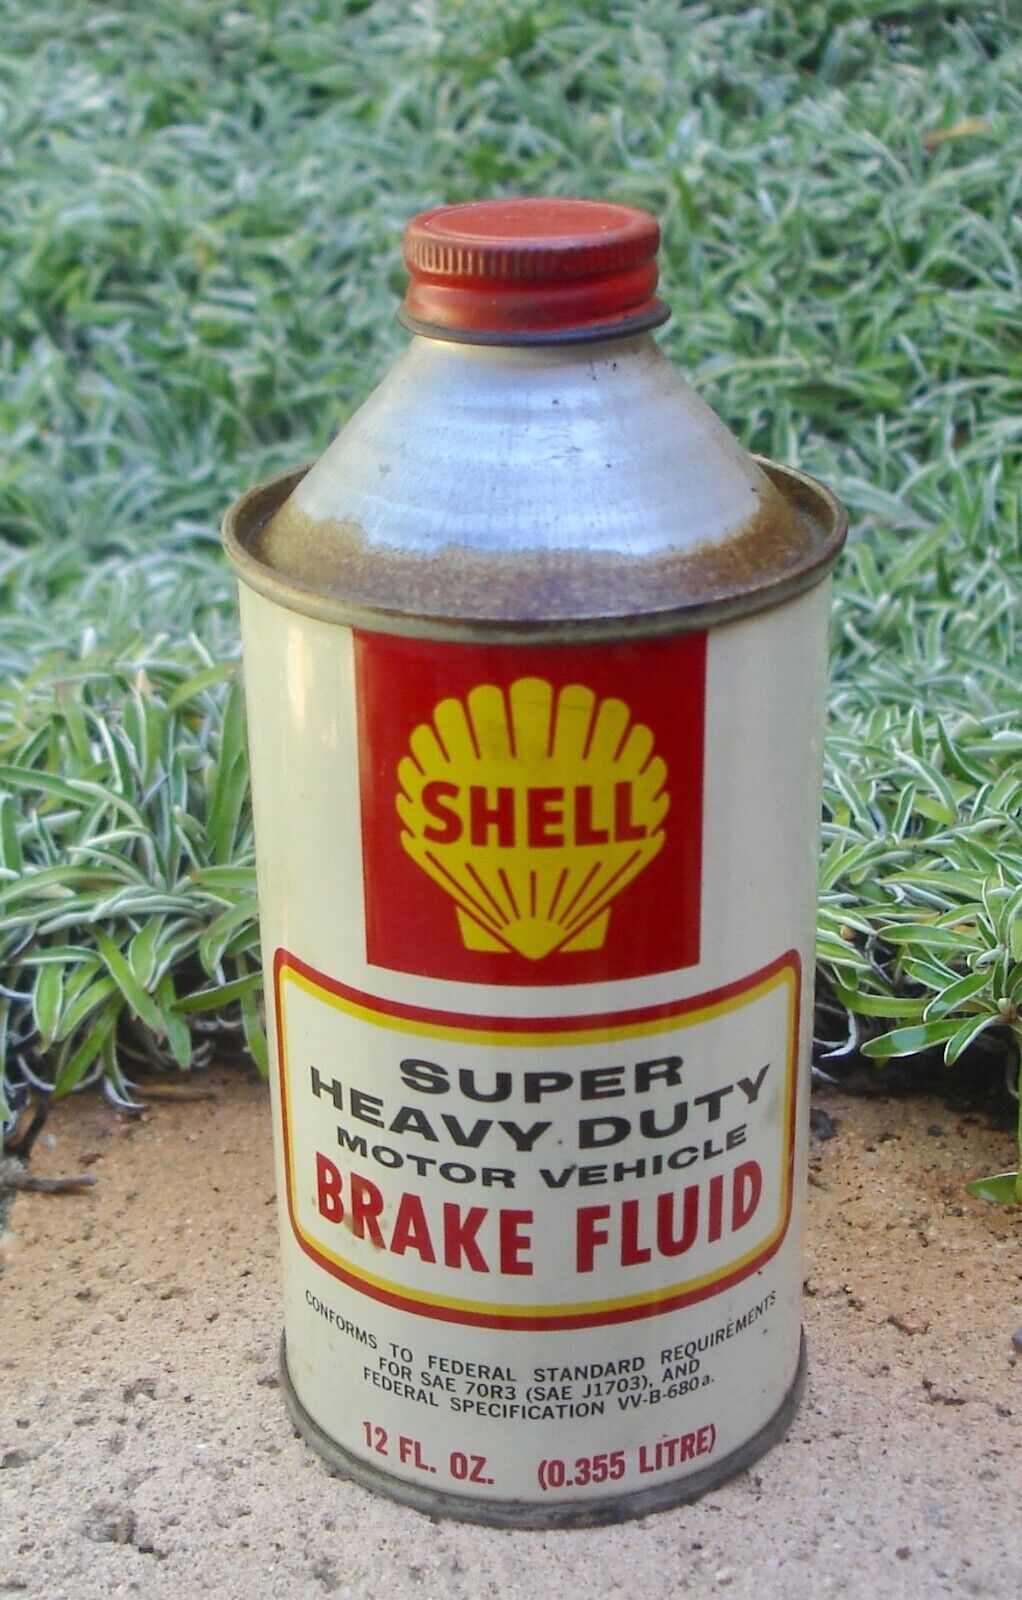 Vintage Shell Oil Super Heavy Duty Motor Vehicle Brake Fluid Can  Cone Top 12oz